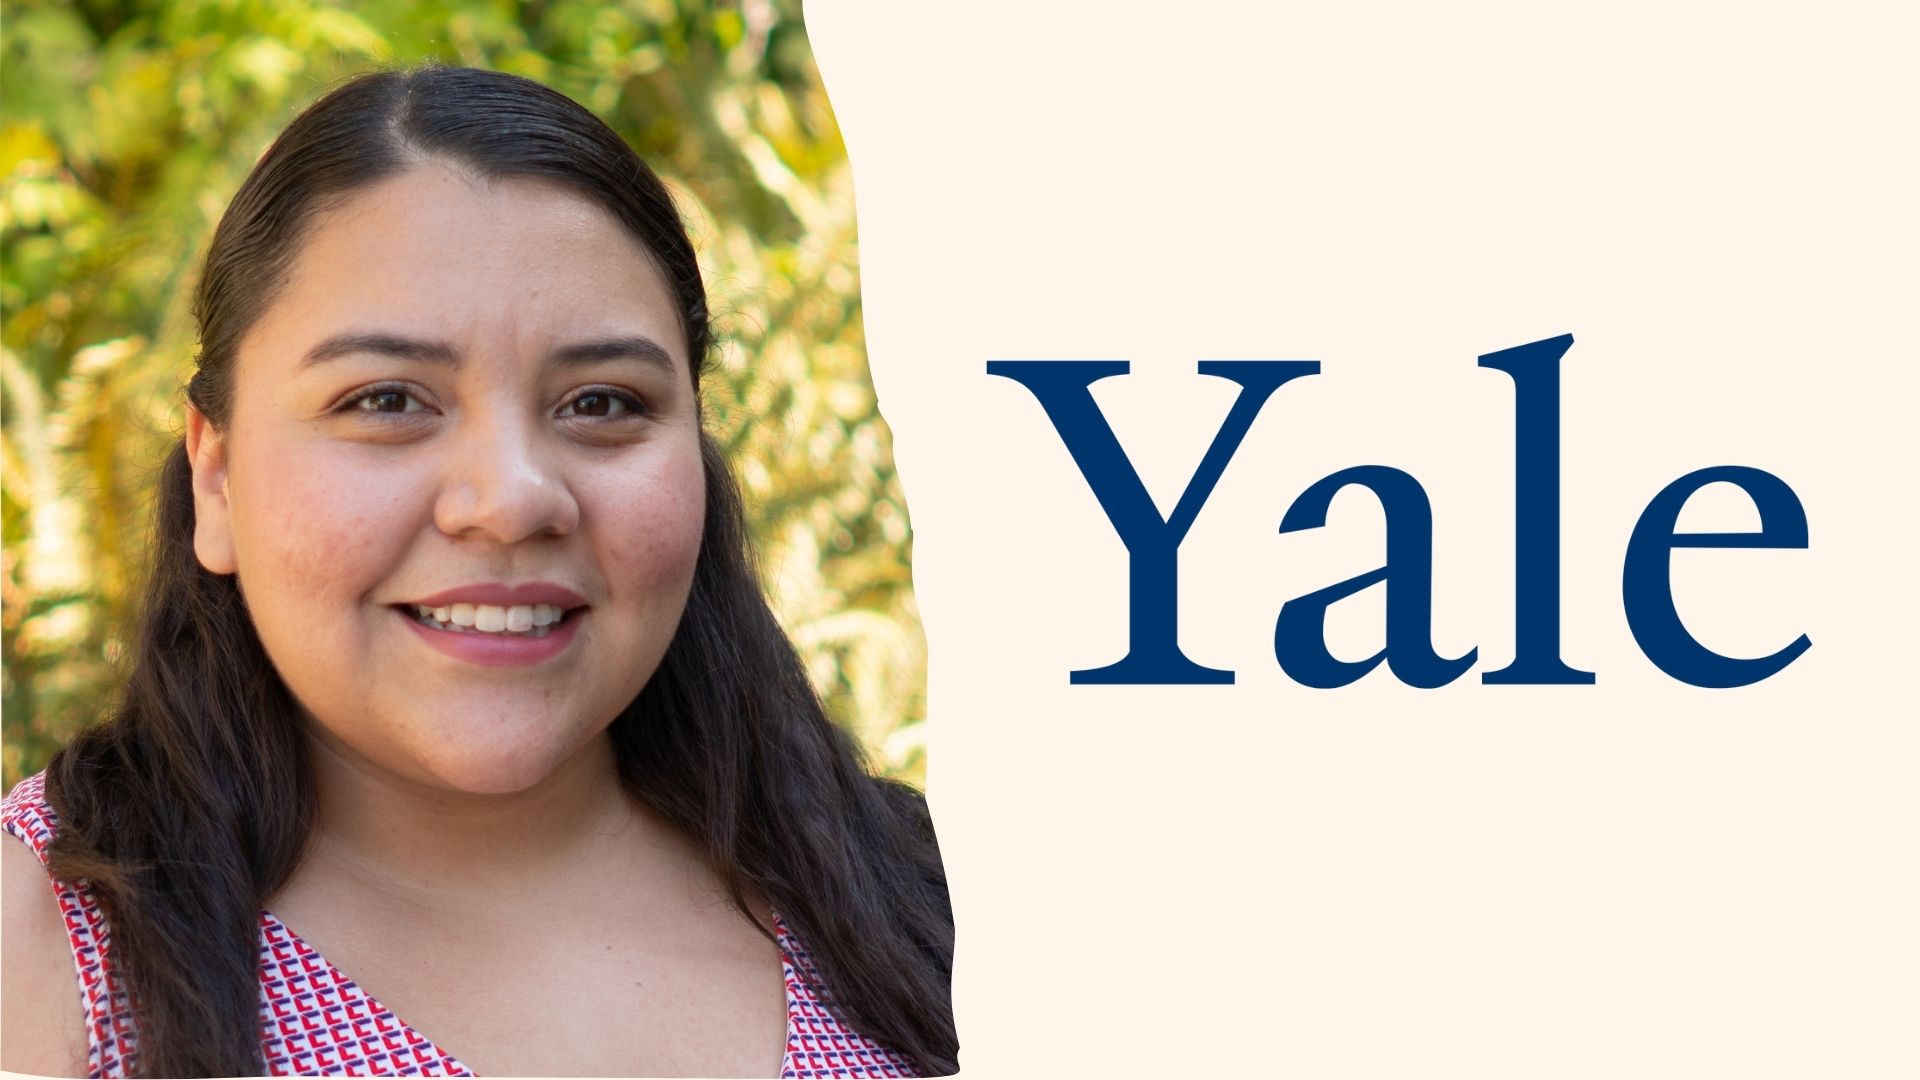 Maria is a young Mexican woman, smiling at the camera with long brown hair. The Yale logo is opposite